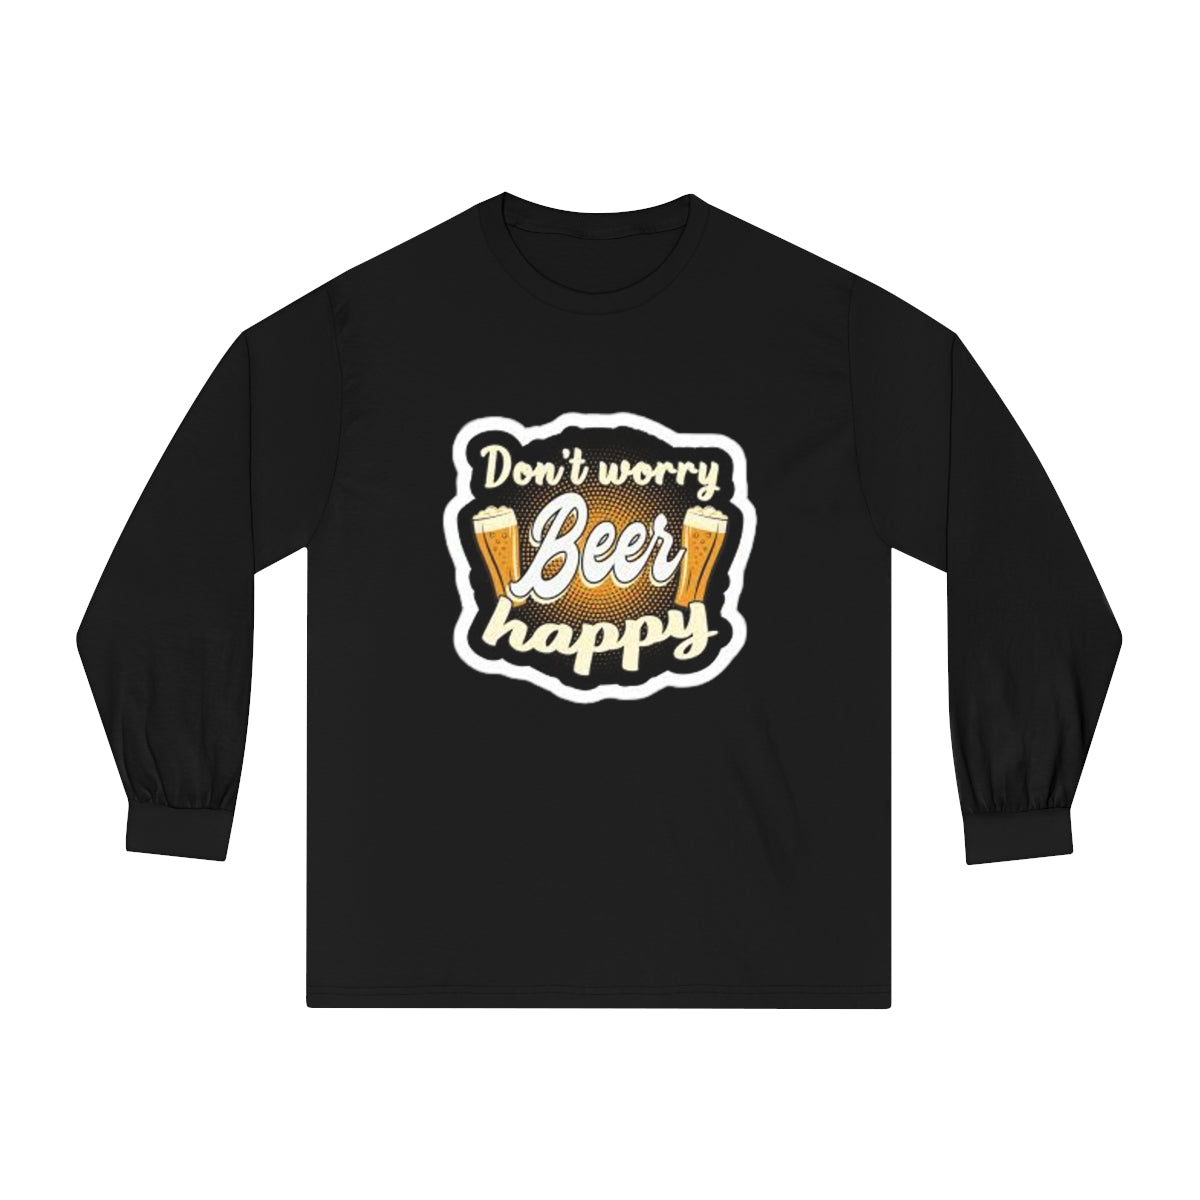 Don’t worry beer happy. Unisex Classic Long Sleeve T-Shirt